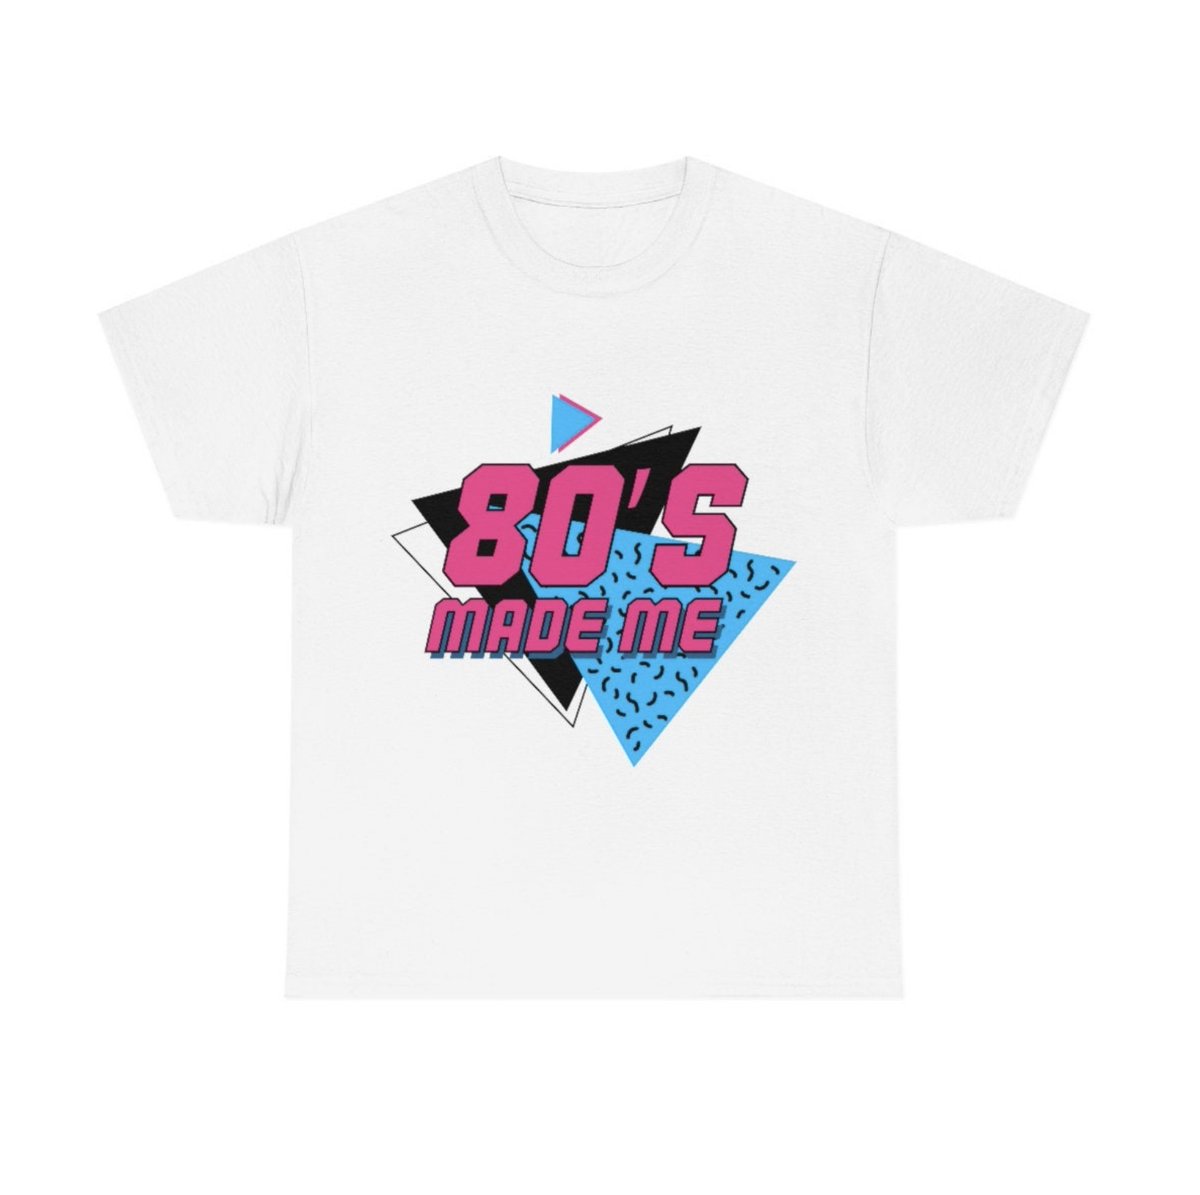 A popular addition to my shop last summer was this “80’s made me” t-shirt. Surely the best decade, right? Available in mens and womens and in a range of sizes and colours #YourBizHour #MHHSBD

etsy.com/uk/listing/124…